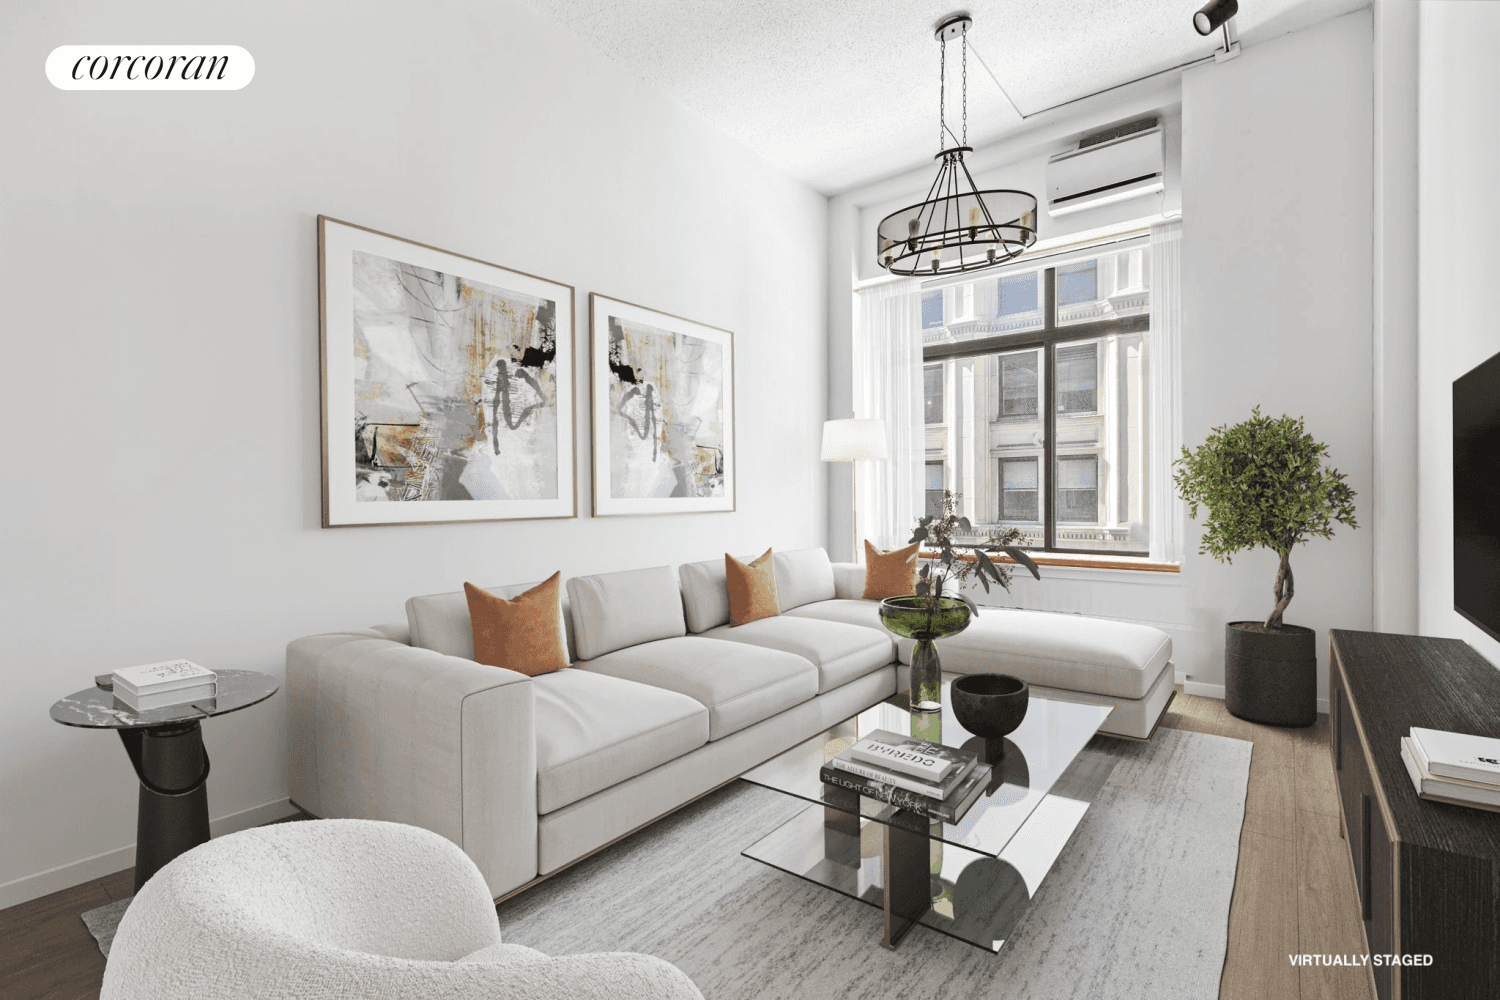 Charming Studio Apartment in the Heart of Manhattan 372 Fifth Ave, New York, NYWelcome to your new home at 372 Fifth Avenue !